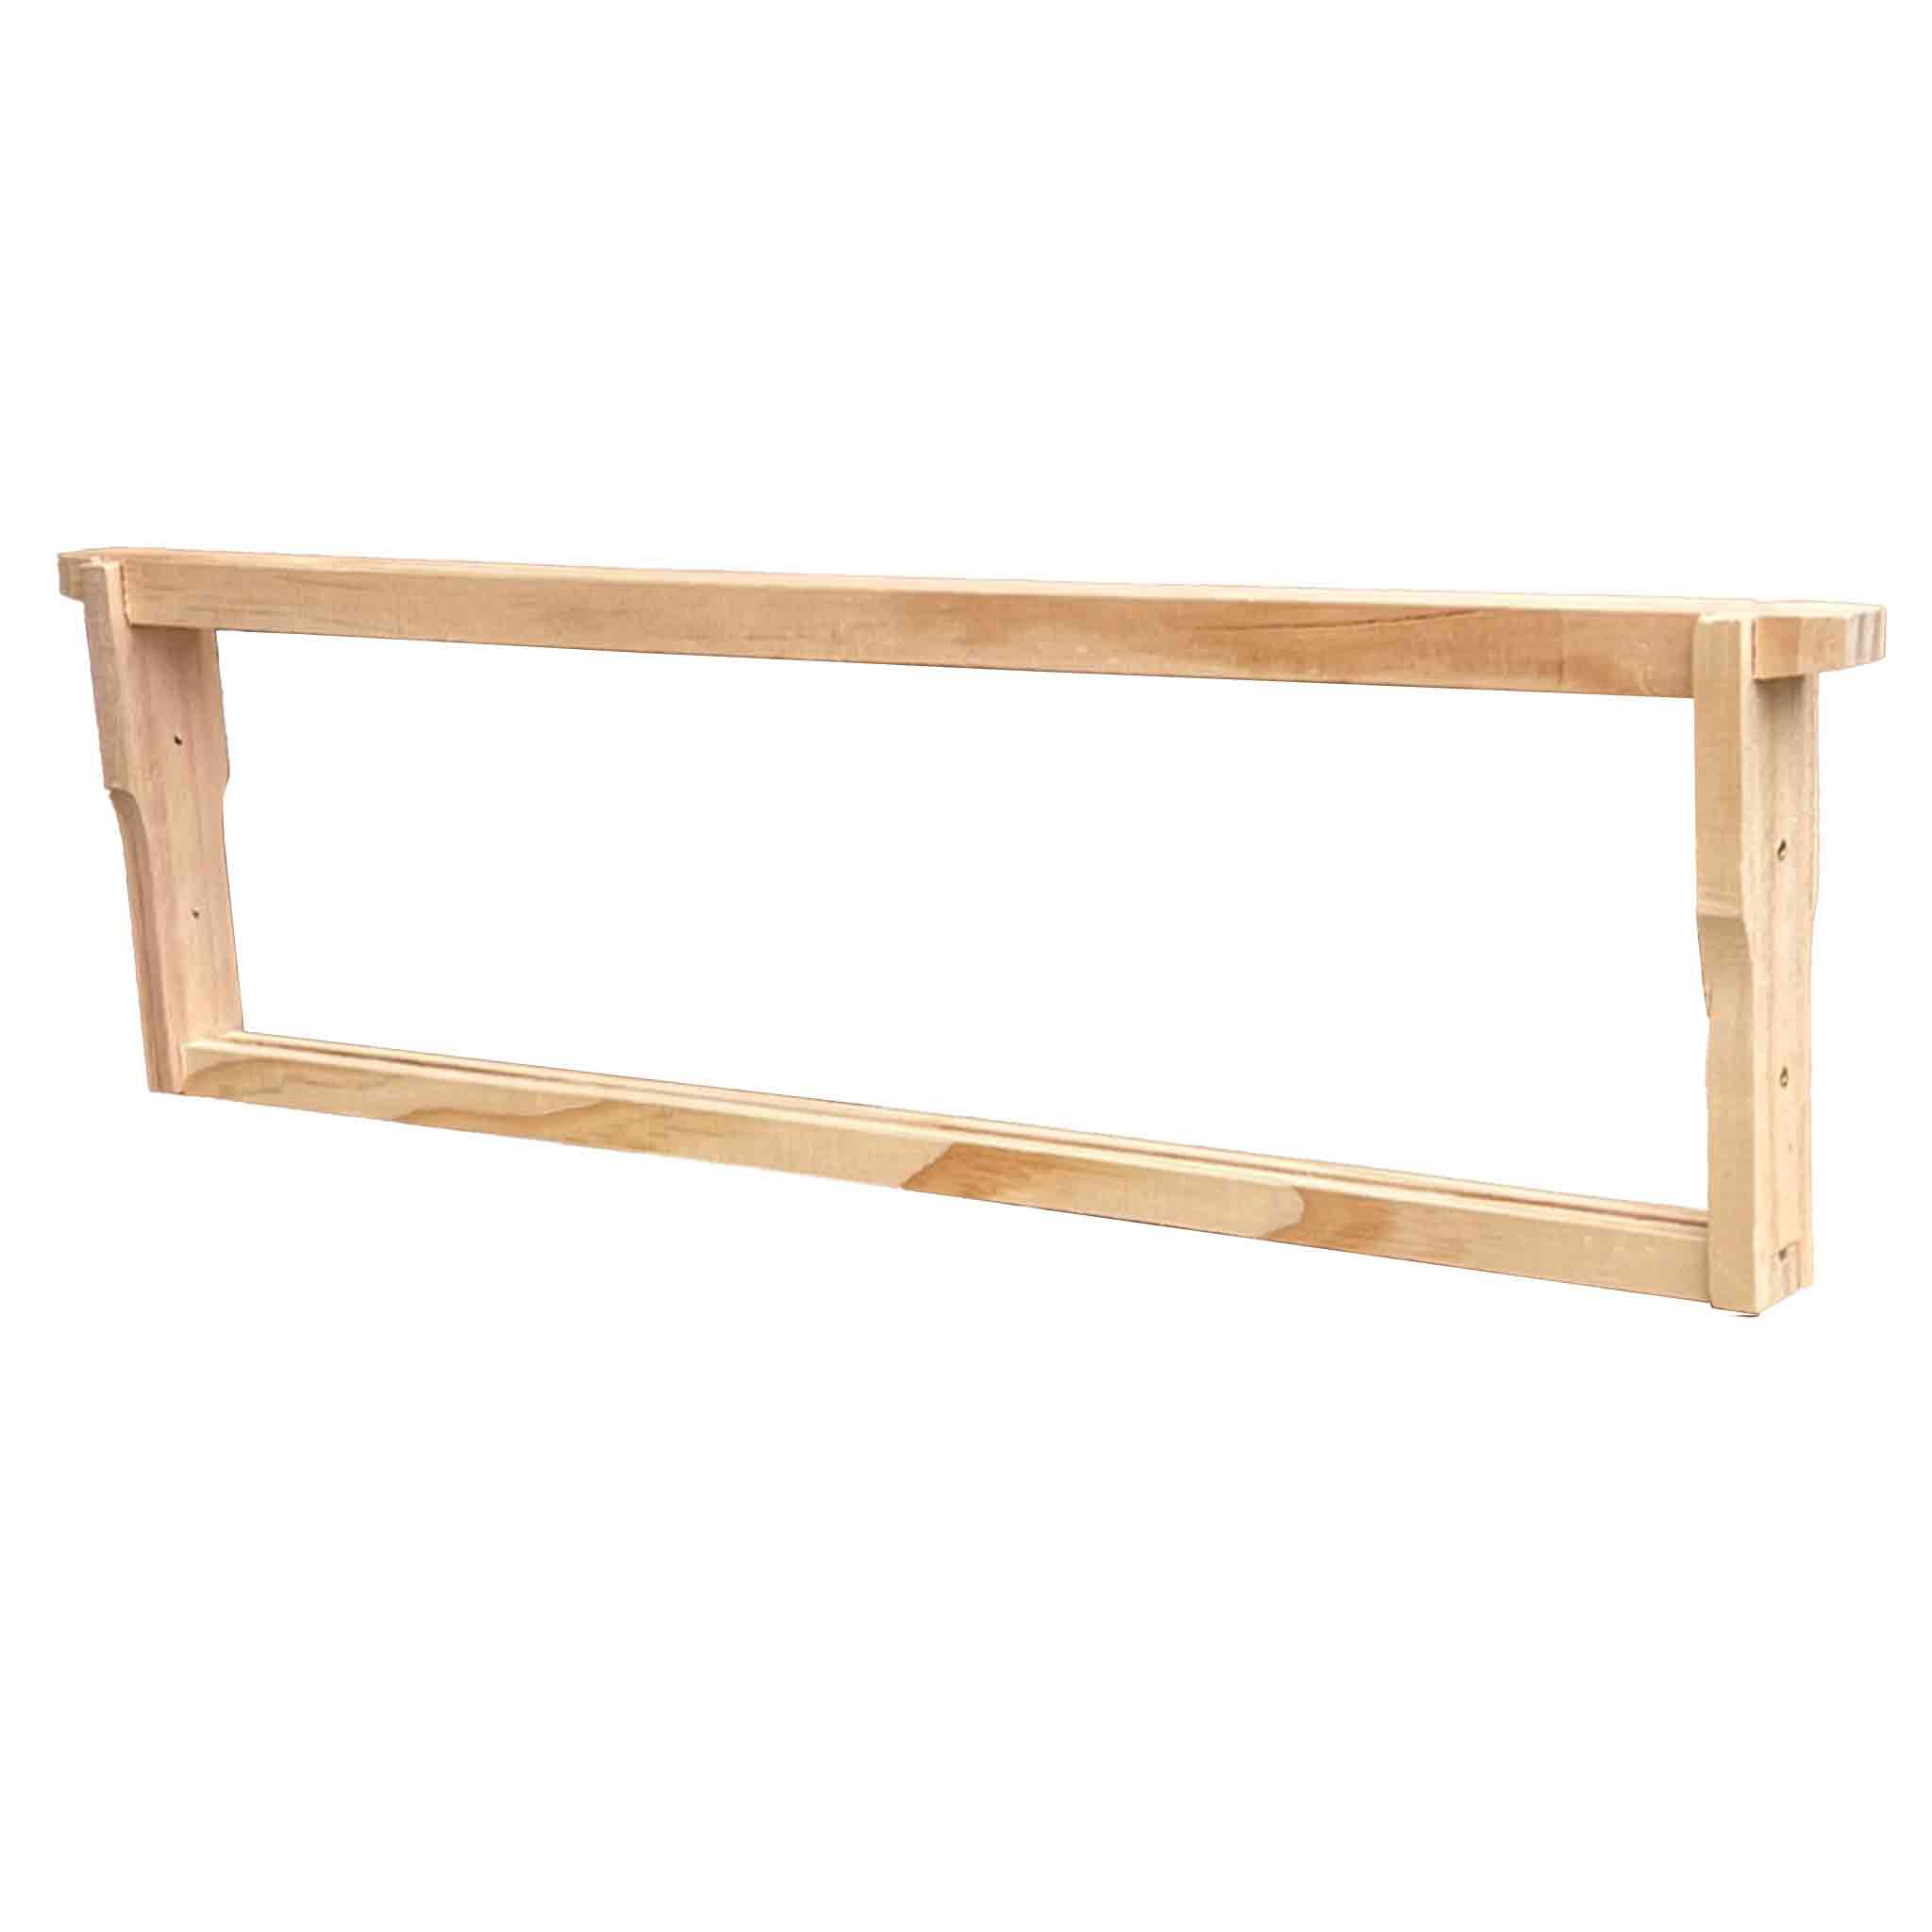 Premium Wooden Ideal Beekeeping Frames - Hive Parts collection by Buzzbee Beekeeping Supplies